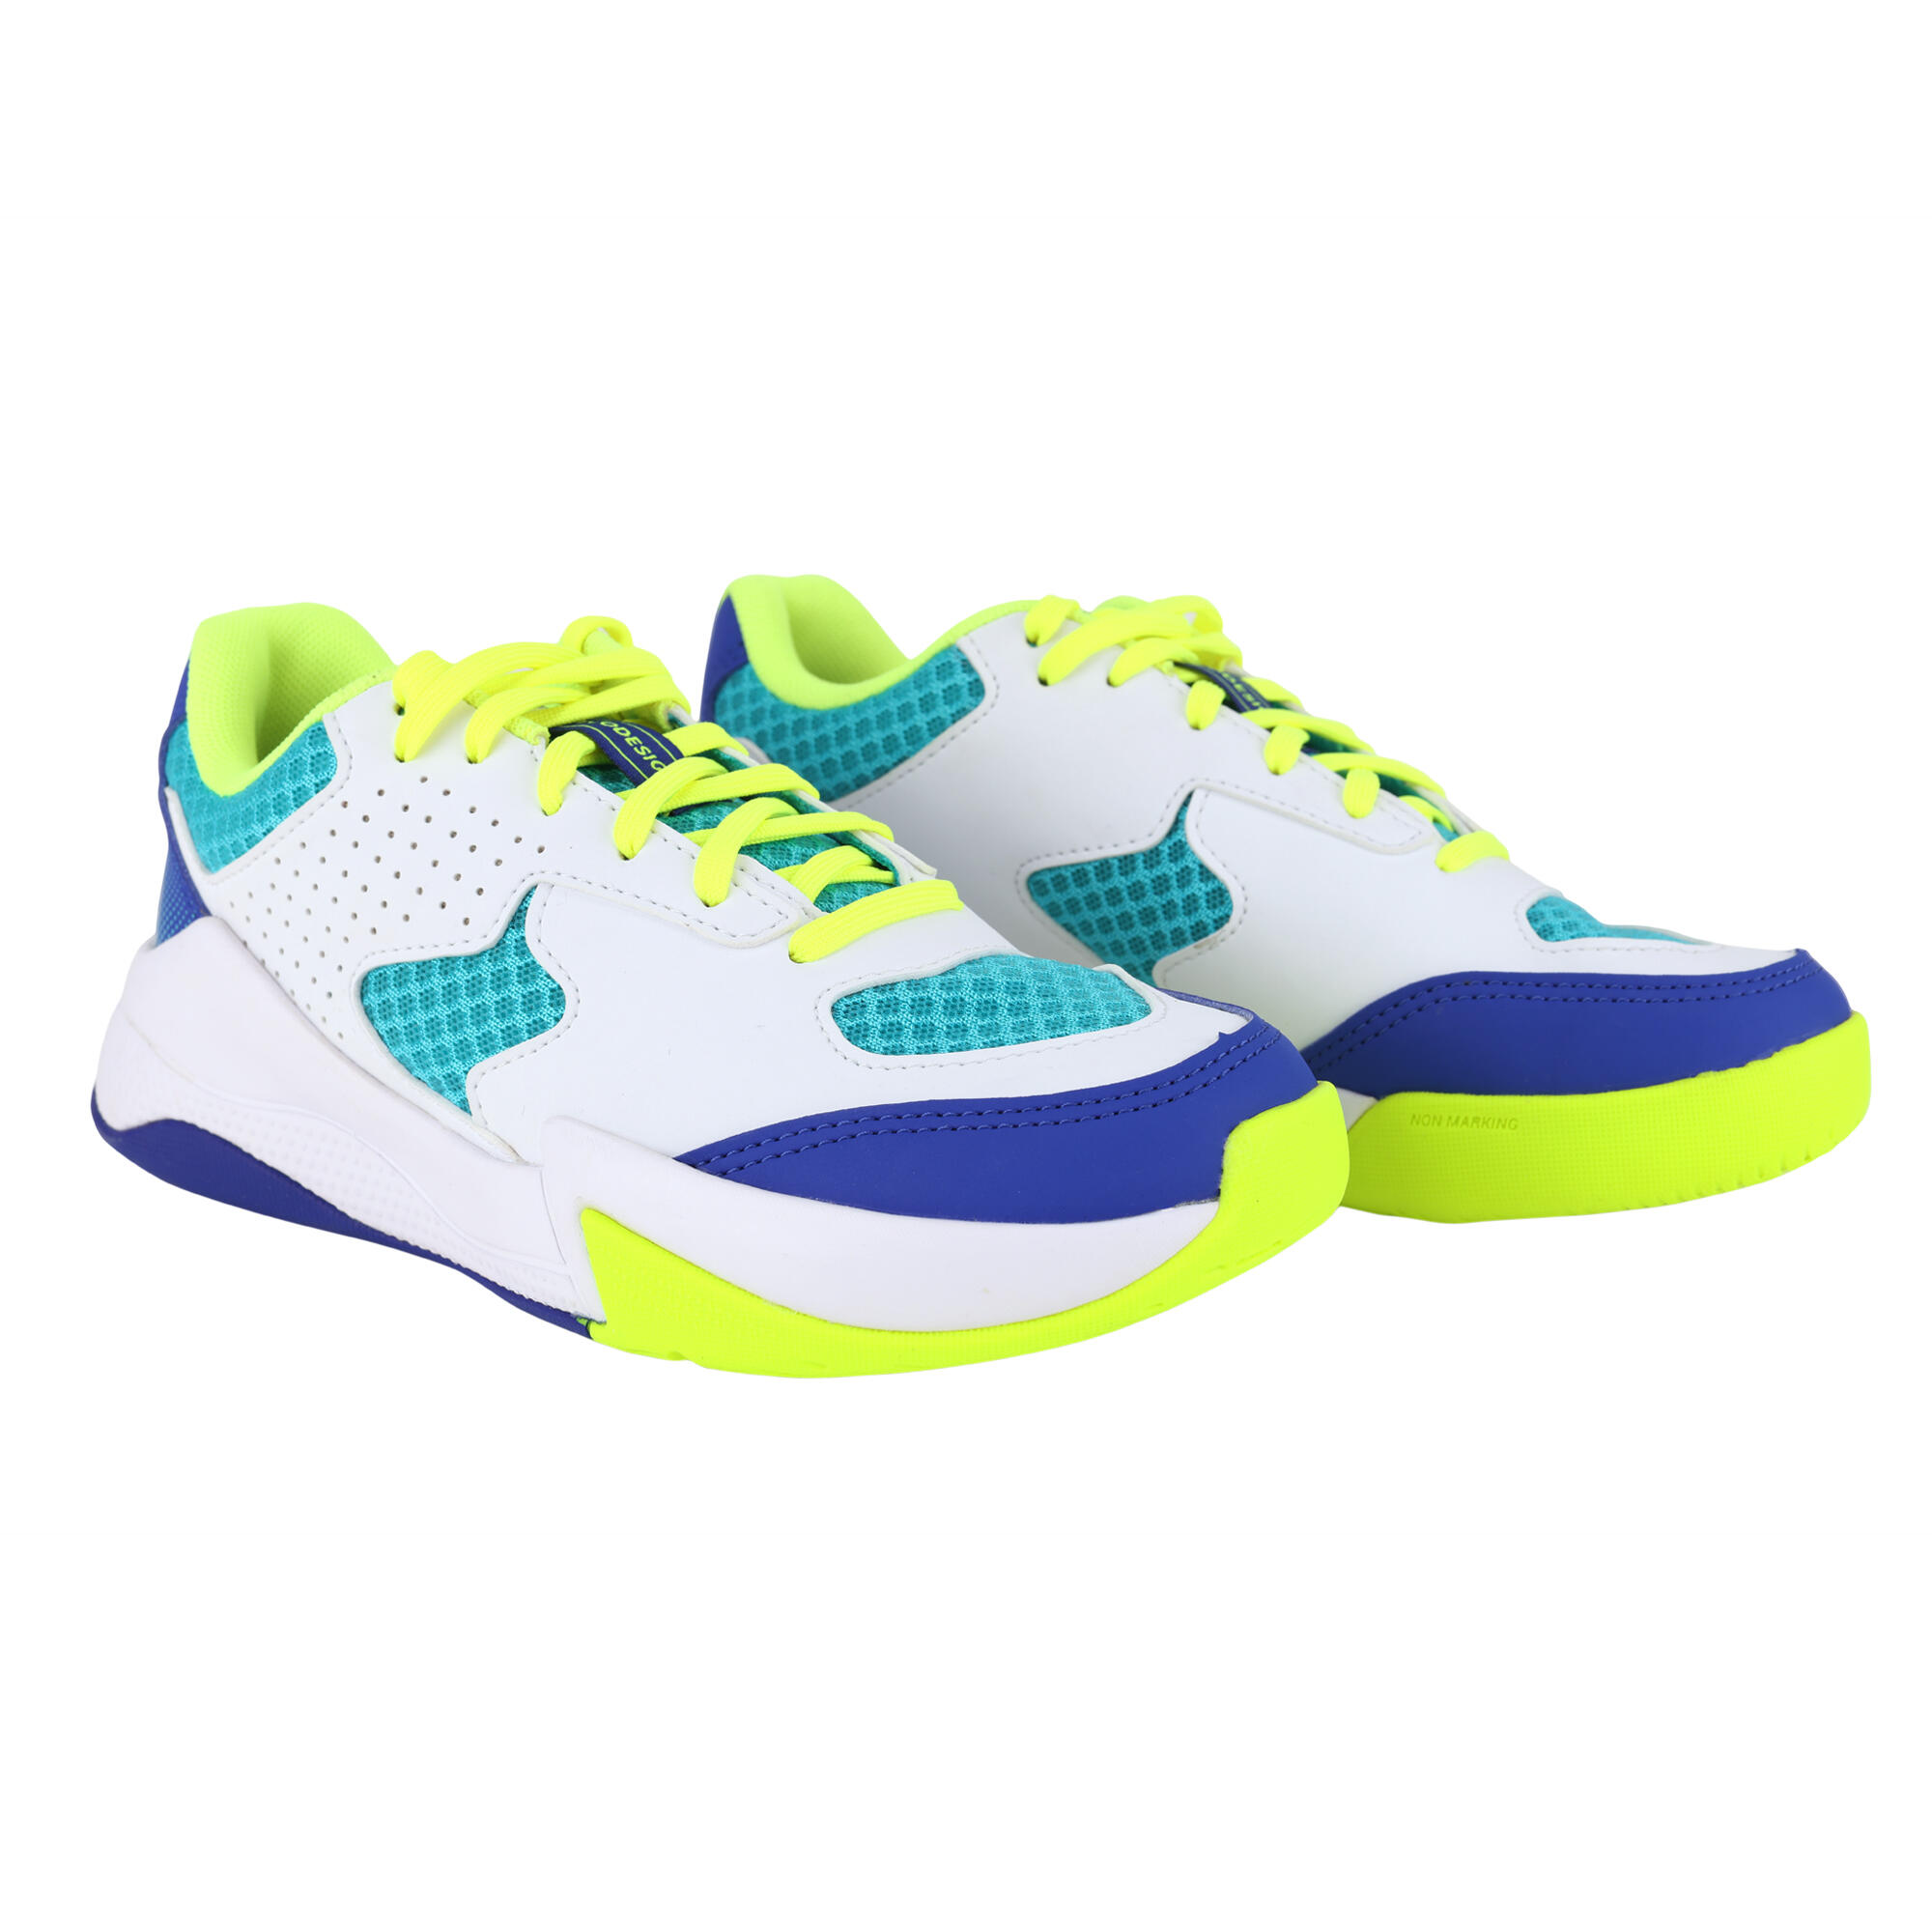 ALLSIX Volleyball Shoes VS100 Comfort With Laces - White/Blue & Green.